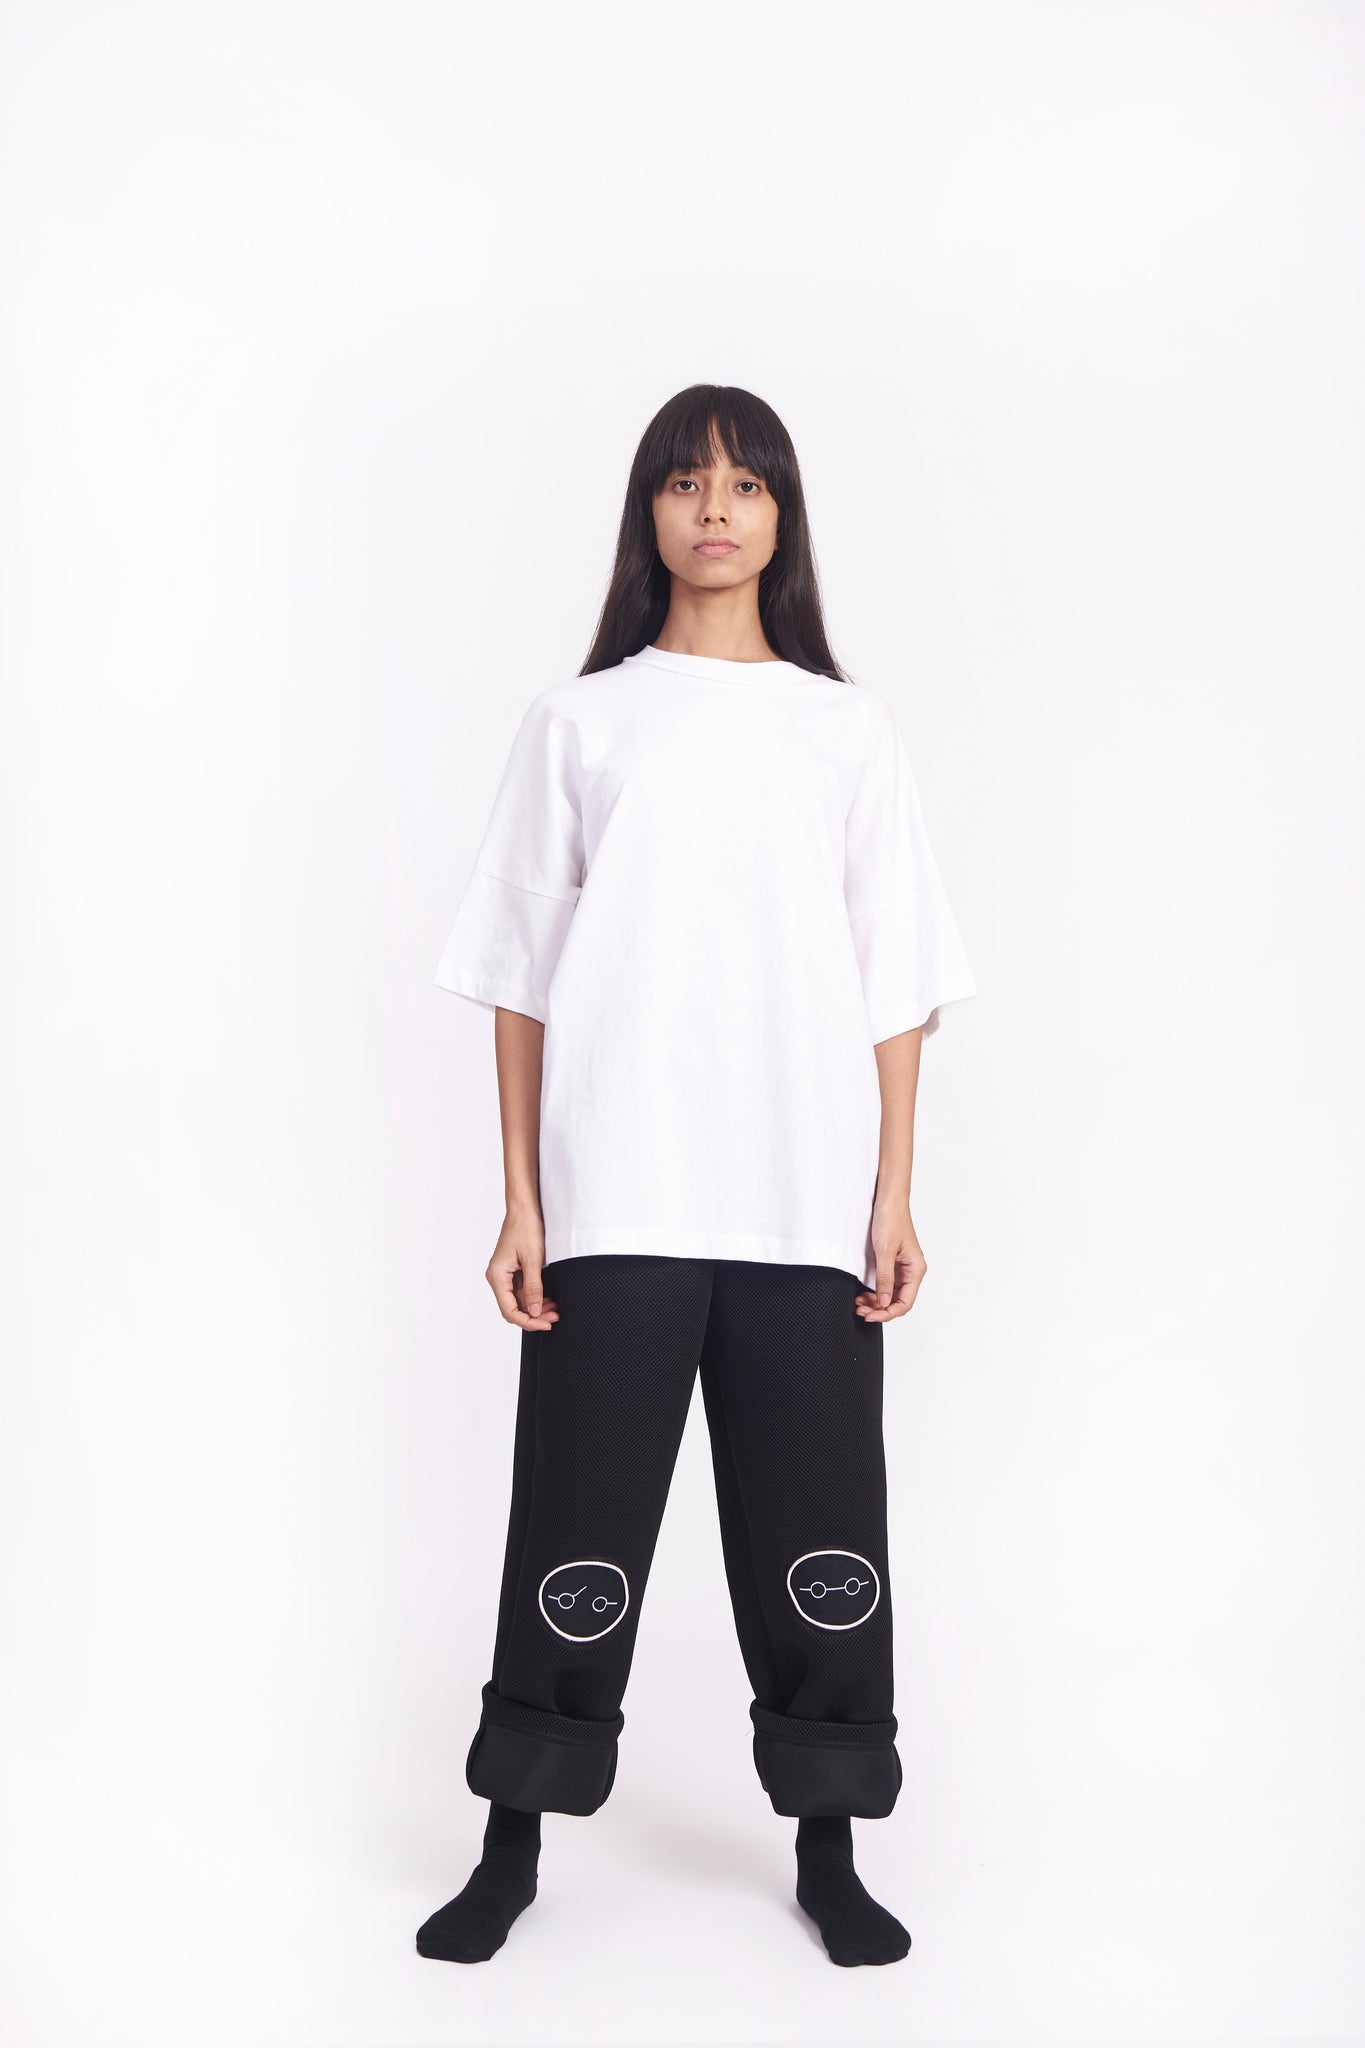 The Air mesh pant features a front zipper, asymmetrical embroidered patches on the front, contrast off-white piping and side pockets.